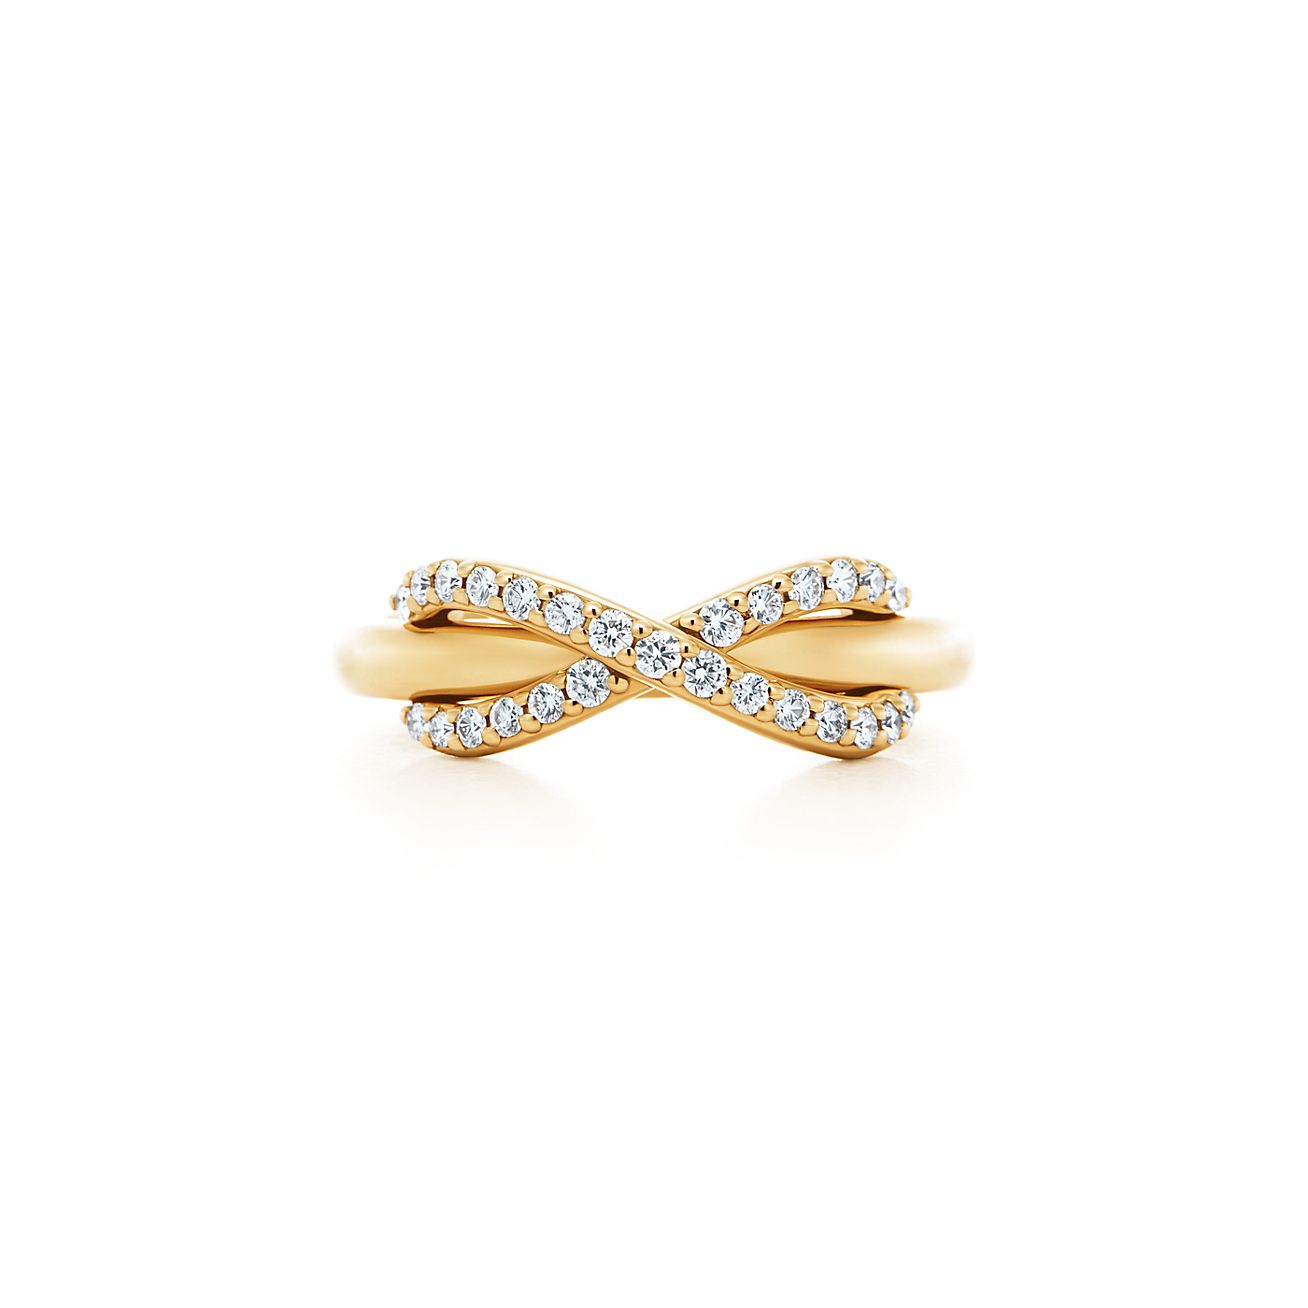 Tiffany Infinity 18k gold ring with 